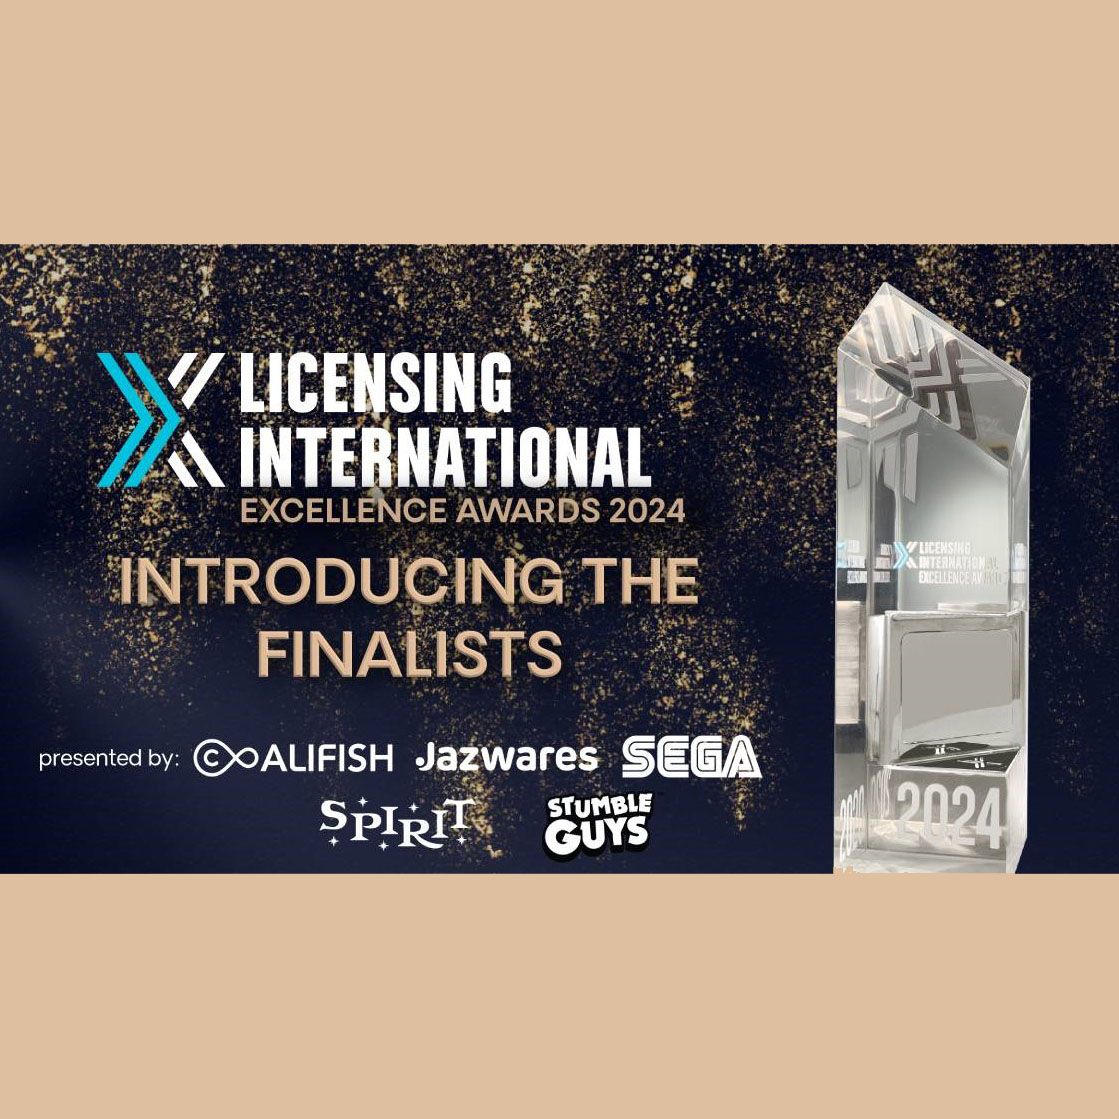 Licensing International Announces 2024 Excellence Awards Finalists